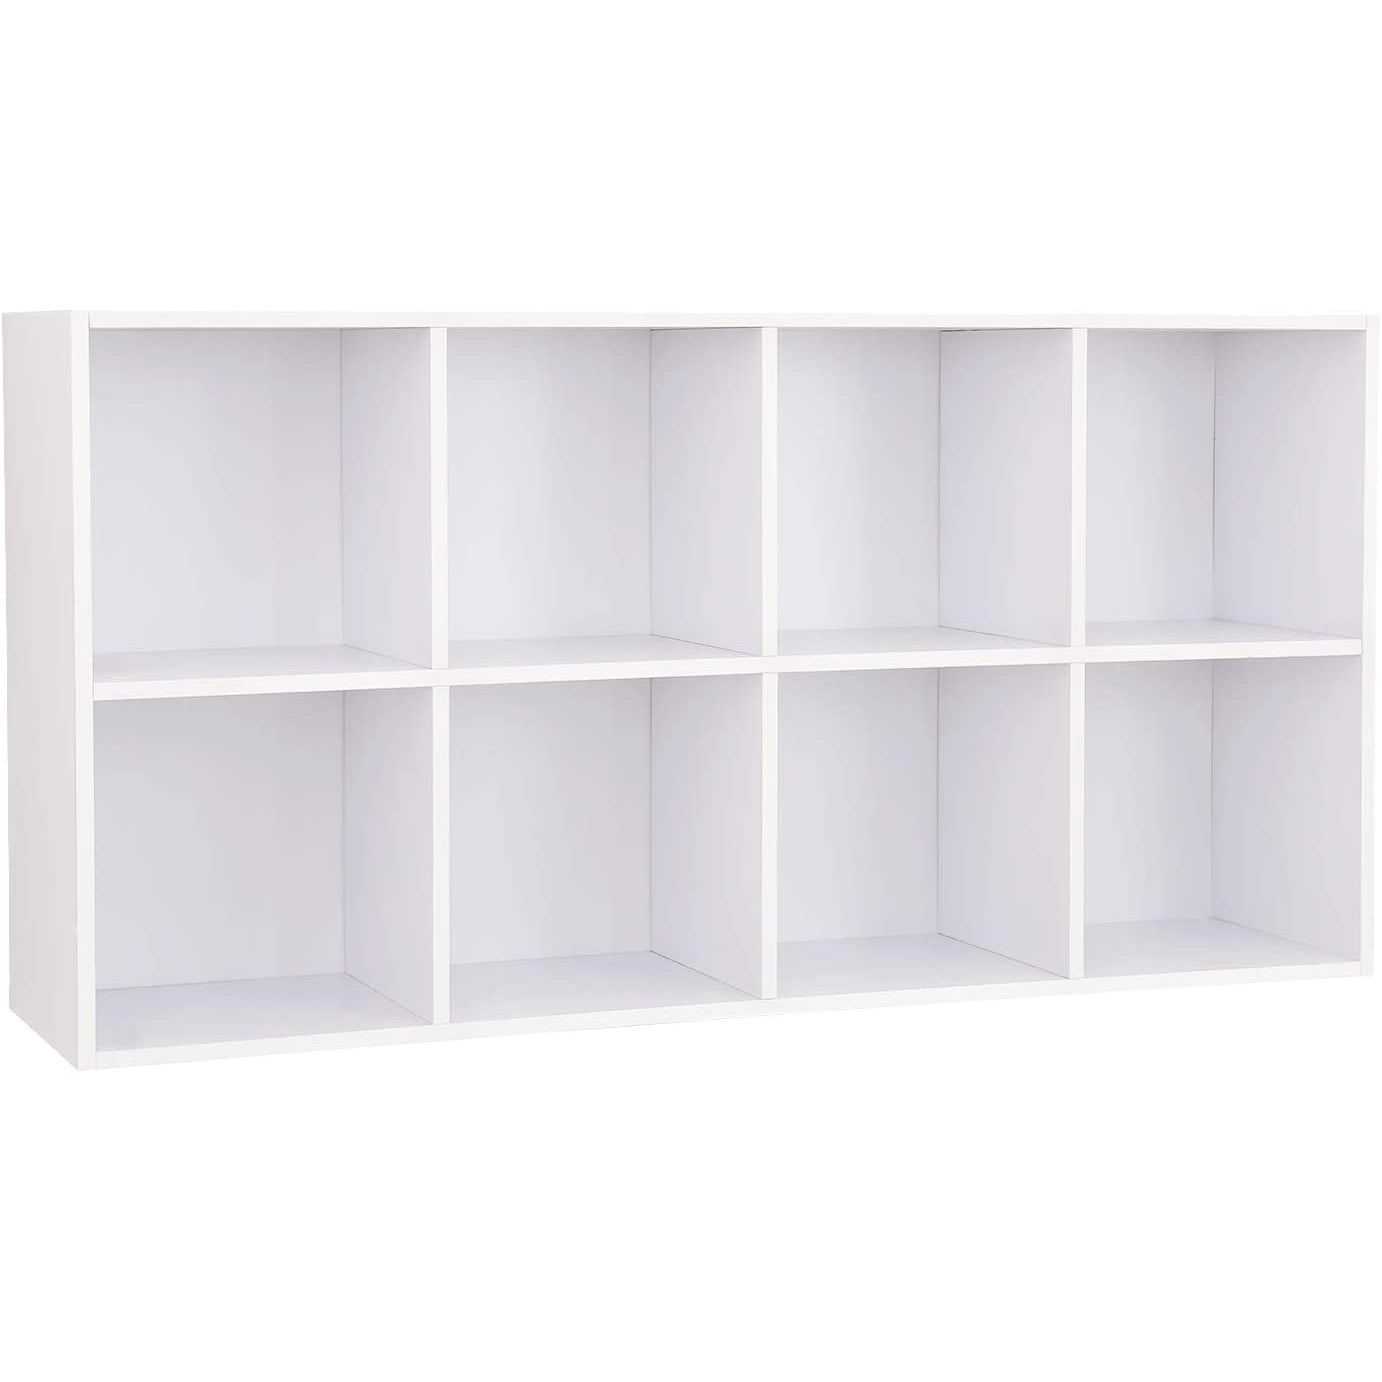 Nancy's Bookcase With 8 Compartments - Wooden Shelves - Freestanding Cabinet - Storage For Office Or Home - White